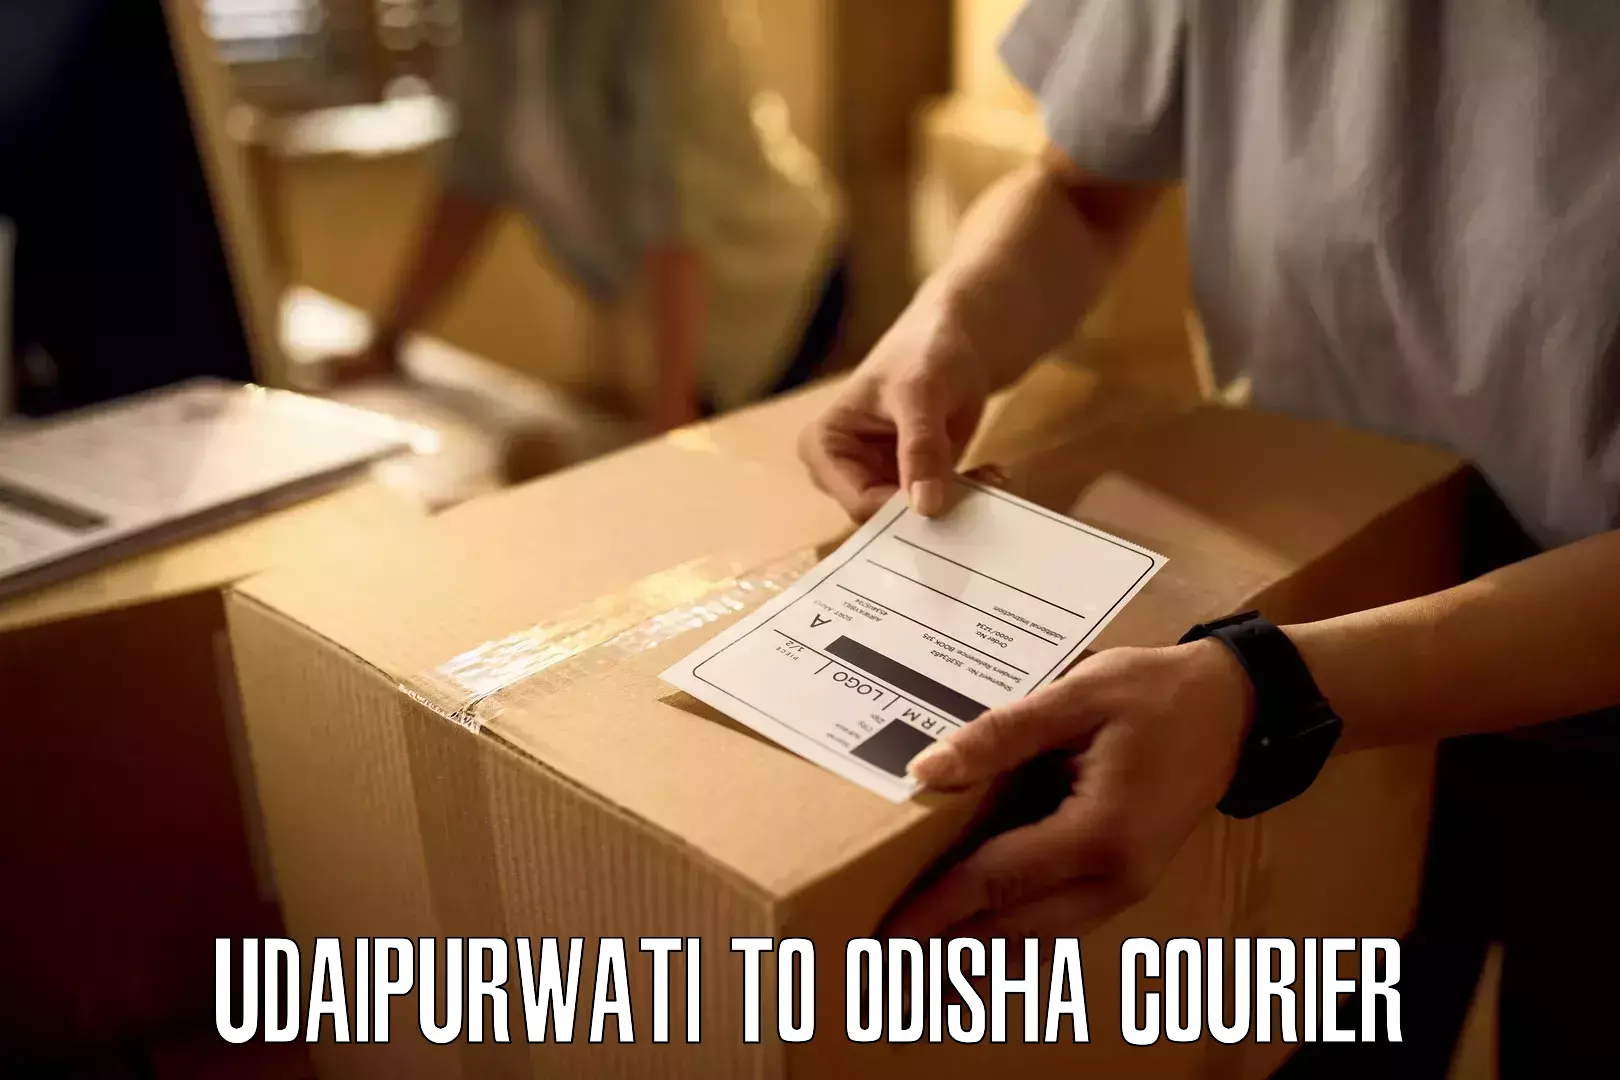 Large-scale shipping solutions Udaipurwati to Dandisahi